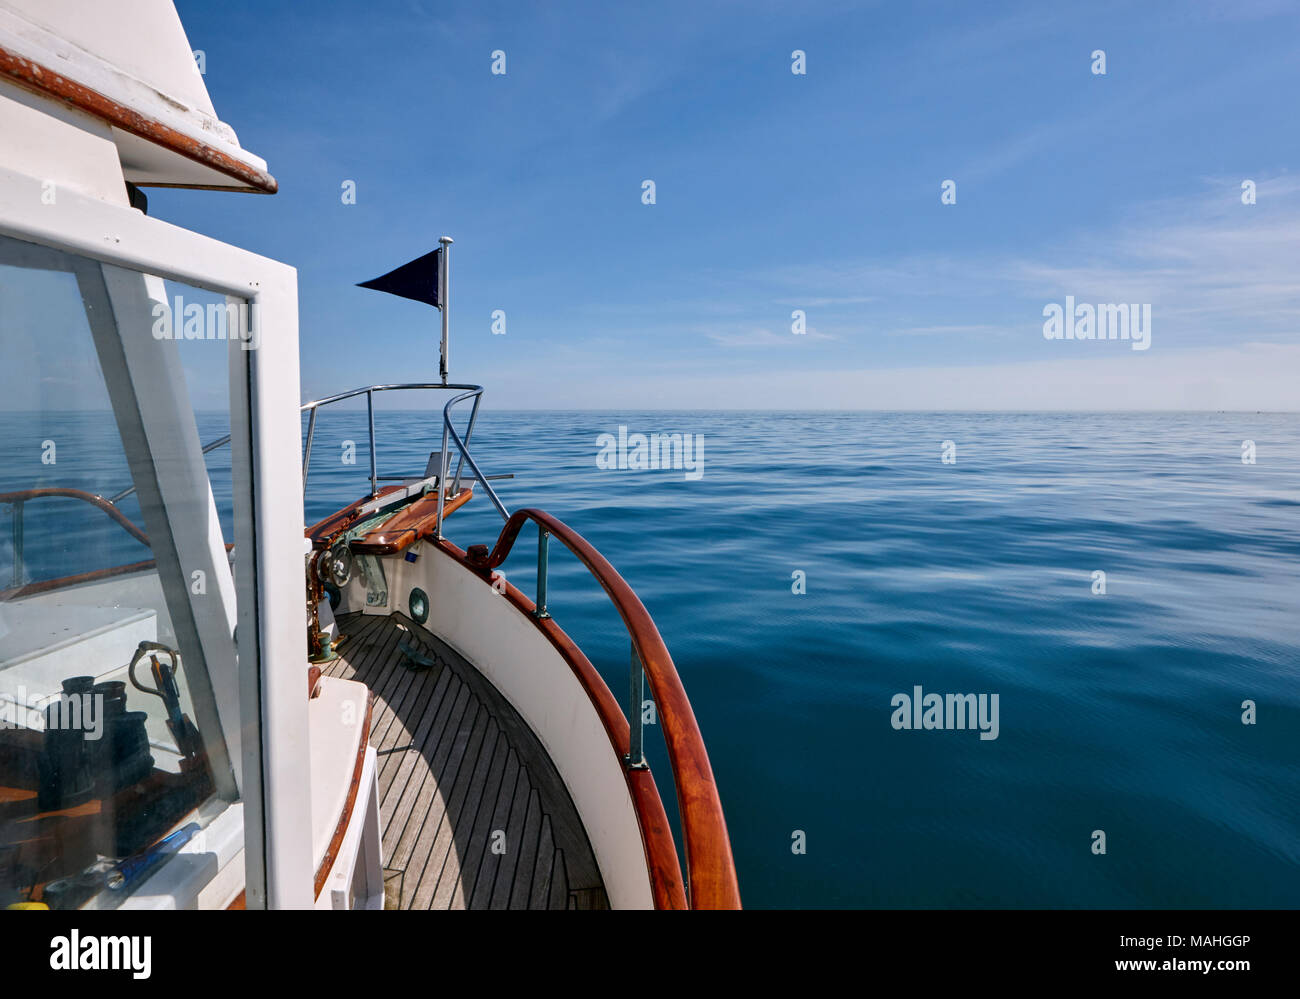 Boat on passage on as smooth sea/ocean Stock Photo